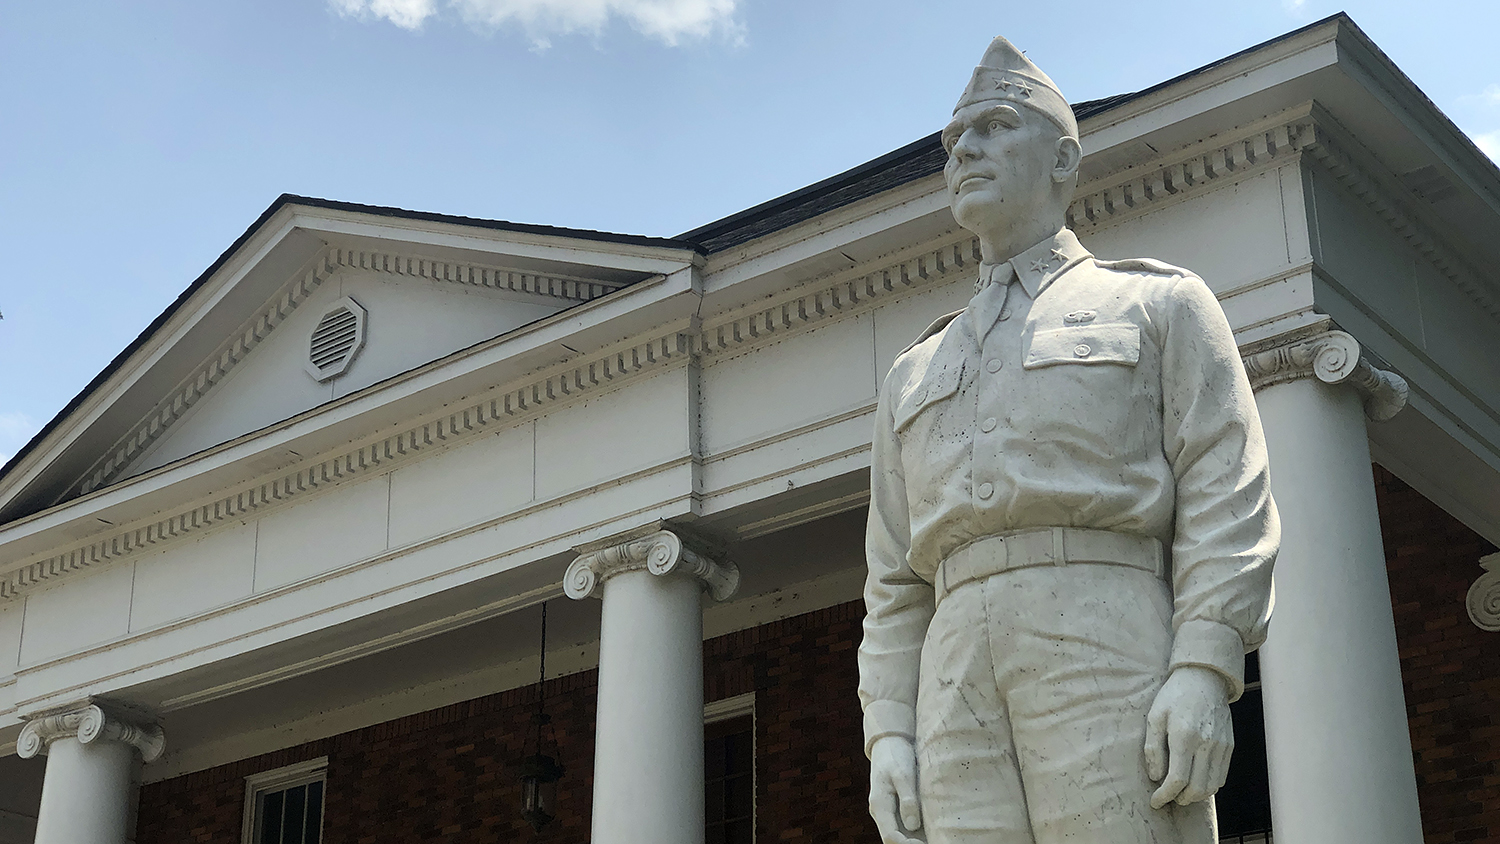 Statue of Gen. William Lee in front of his family home.